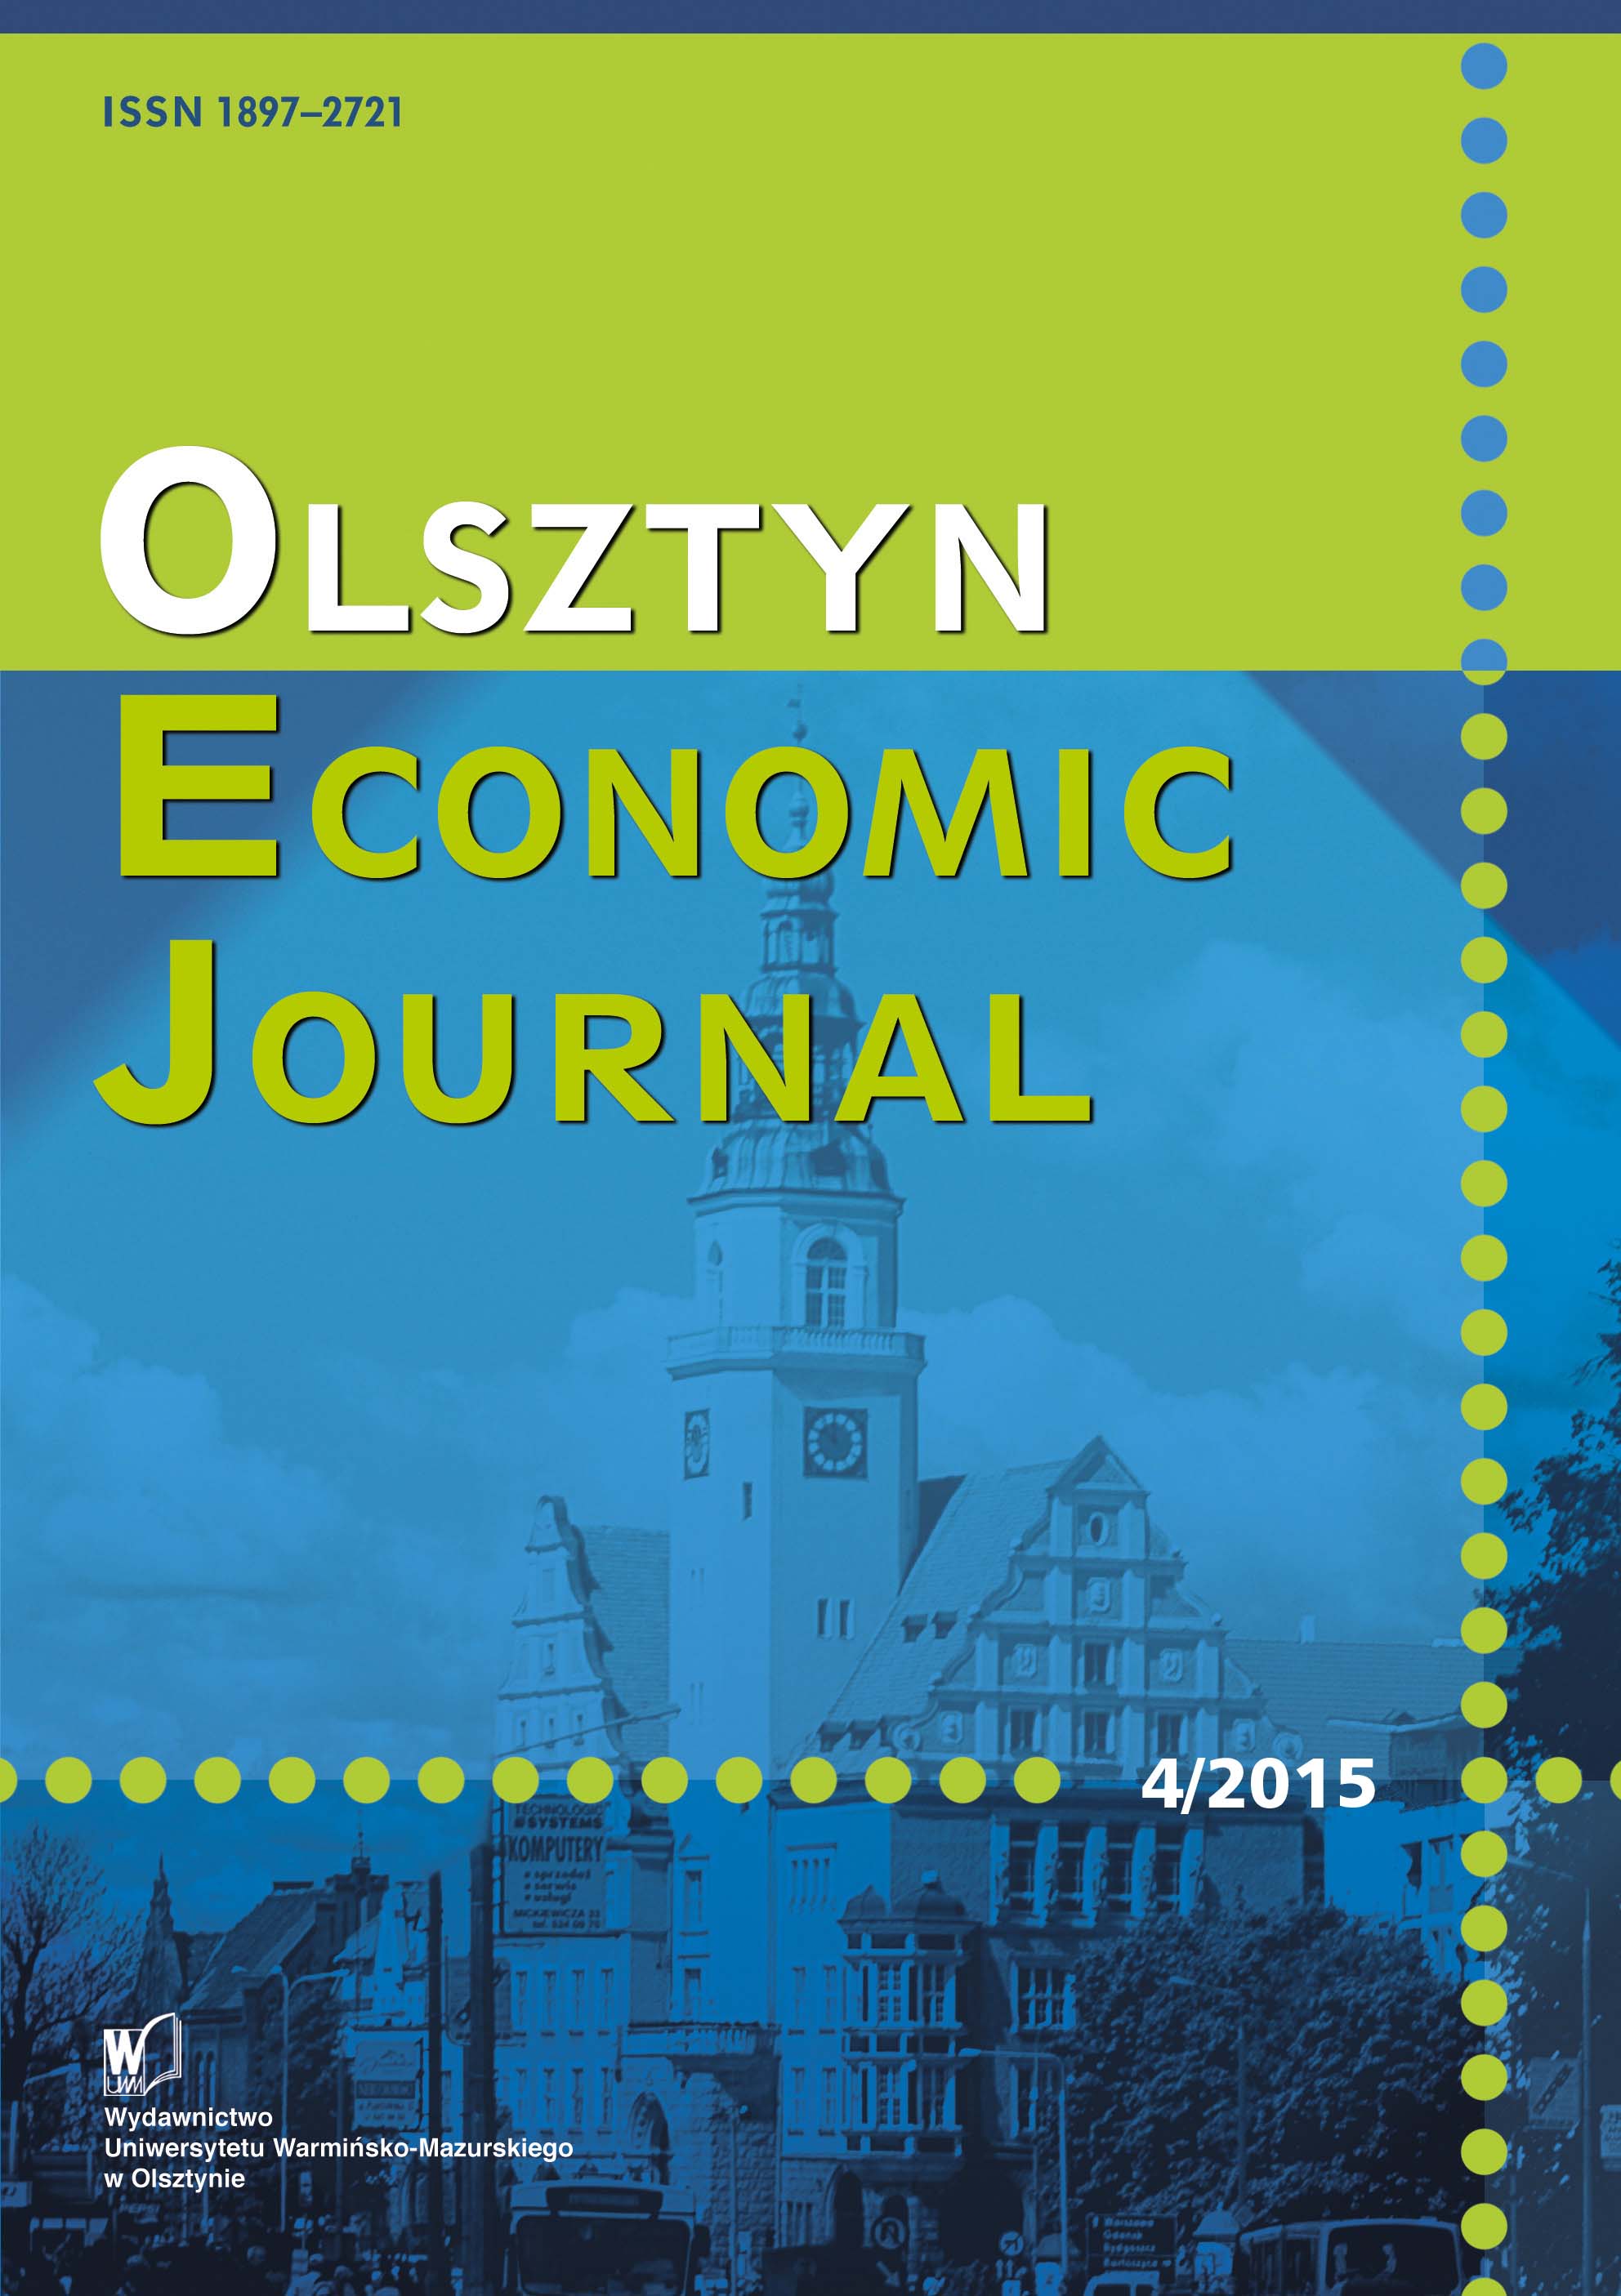 Regional Variation of Potential and Actual Labor Resources in Poland in the Light of Forecasts Through 2040